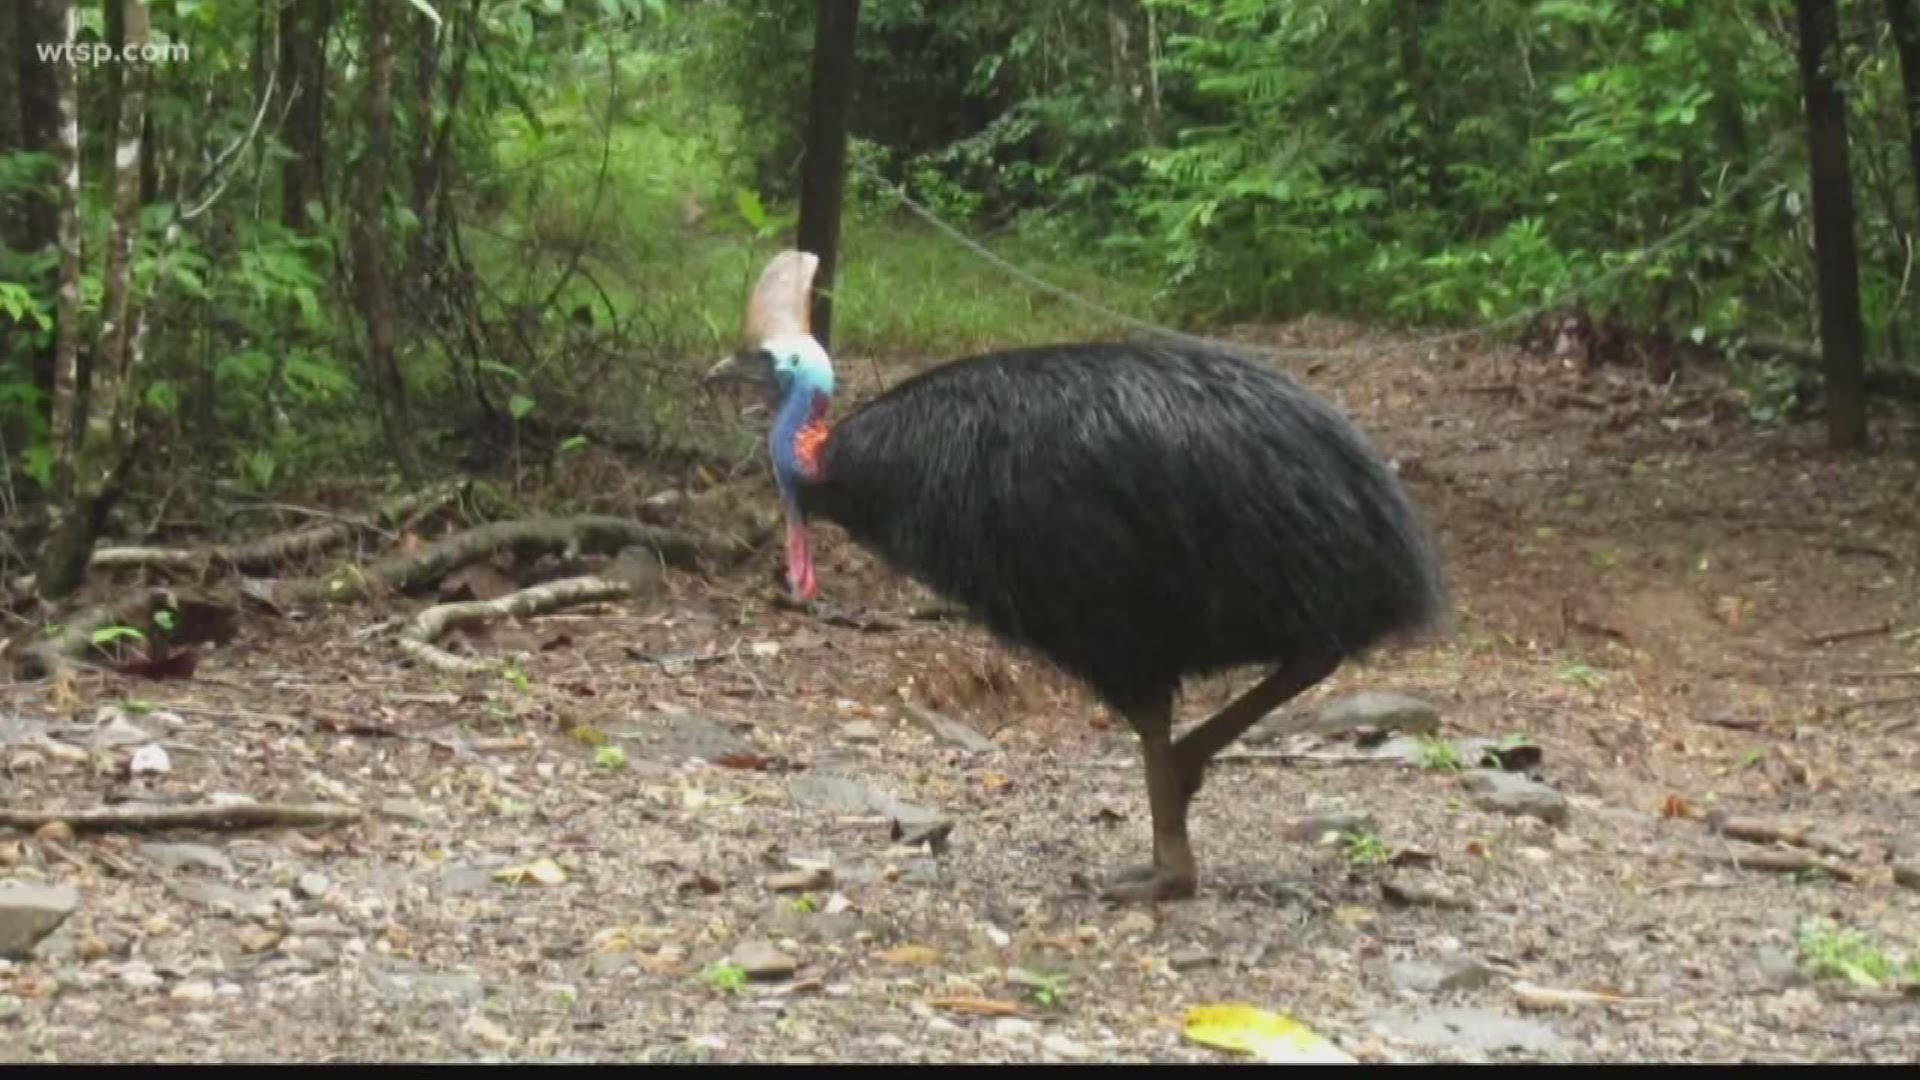 A Cassowary is considered one of the world's most dangerous birds. https://on.wtsp.com/2Uf2eeZ